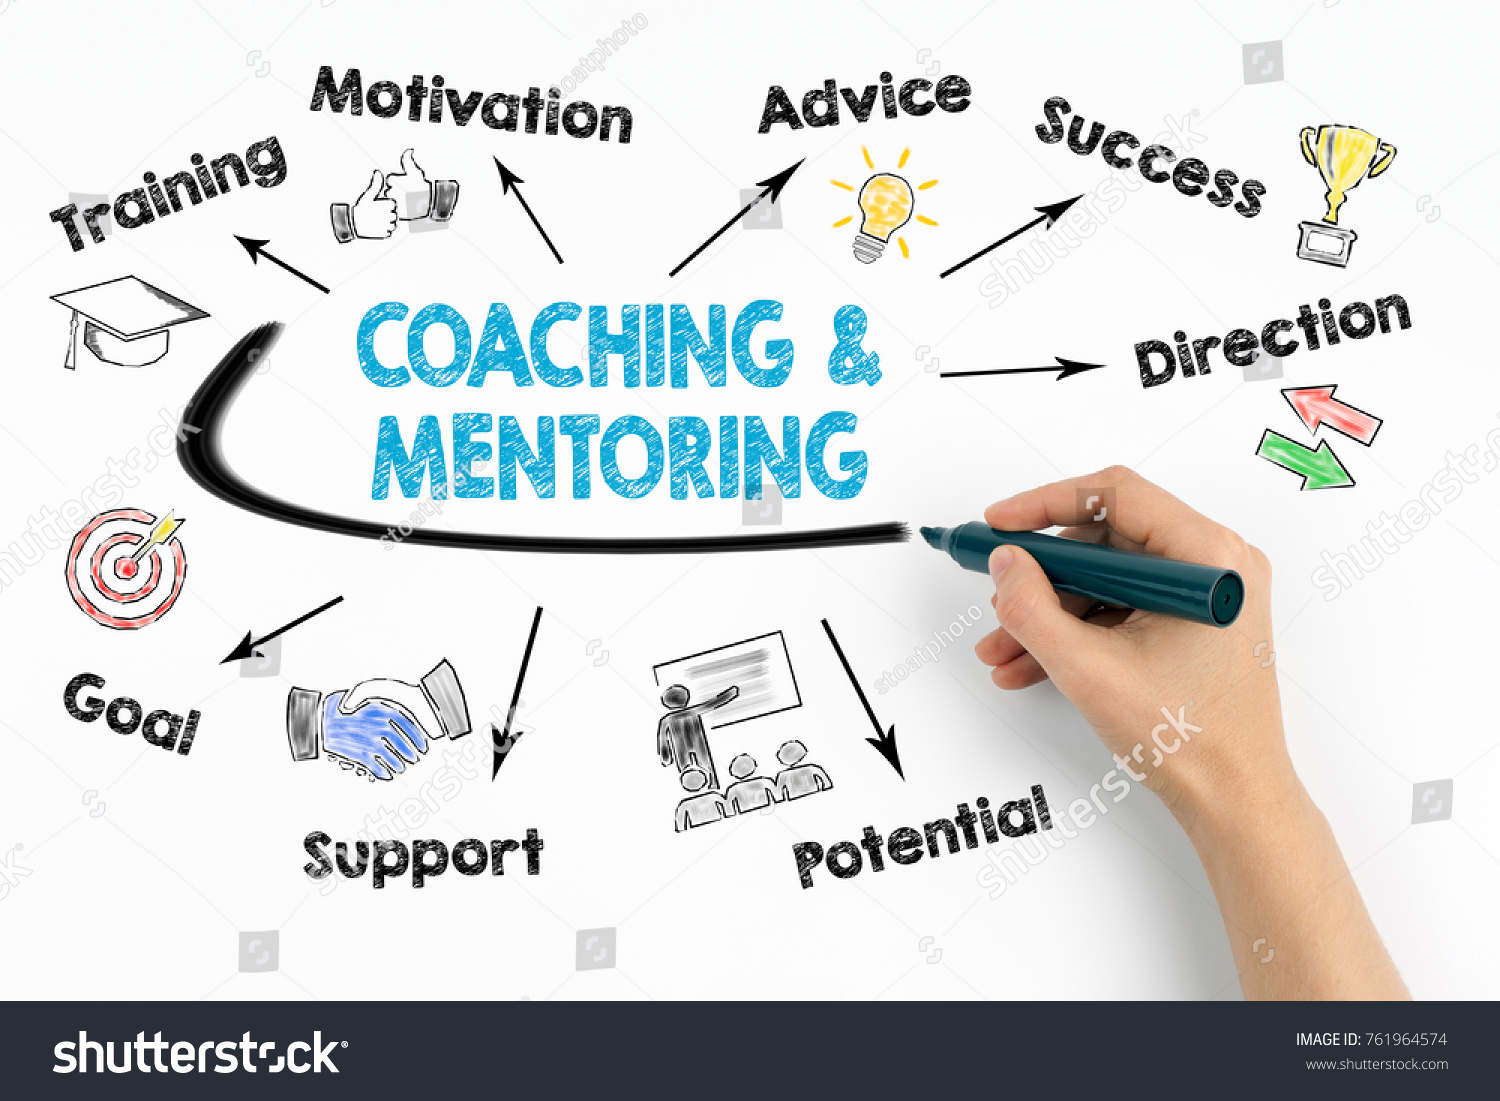 Coaching and Mentoring Concept. Chart with keywords and icons on white background #761964574